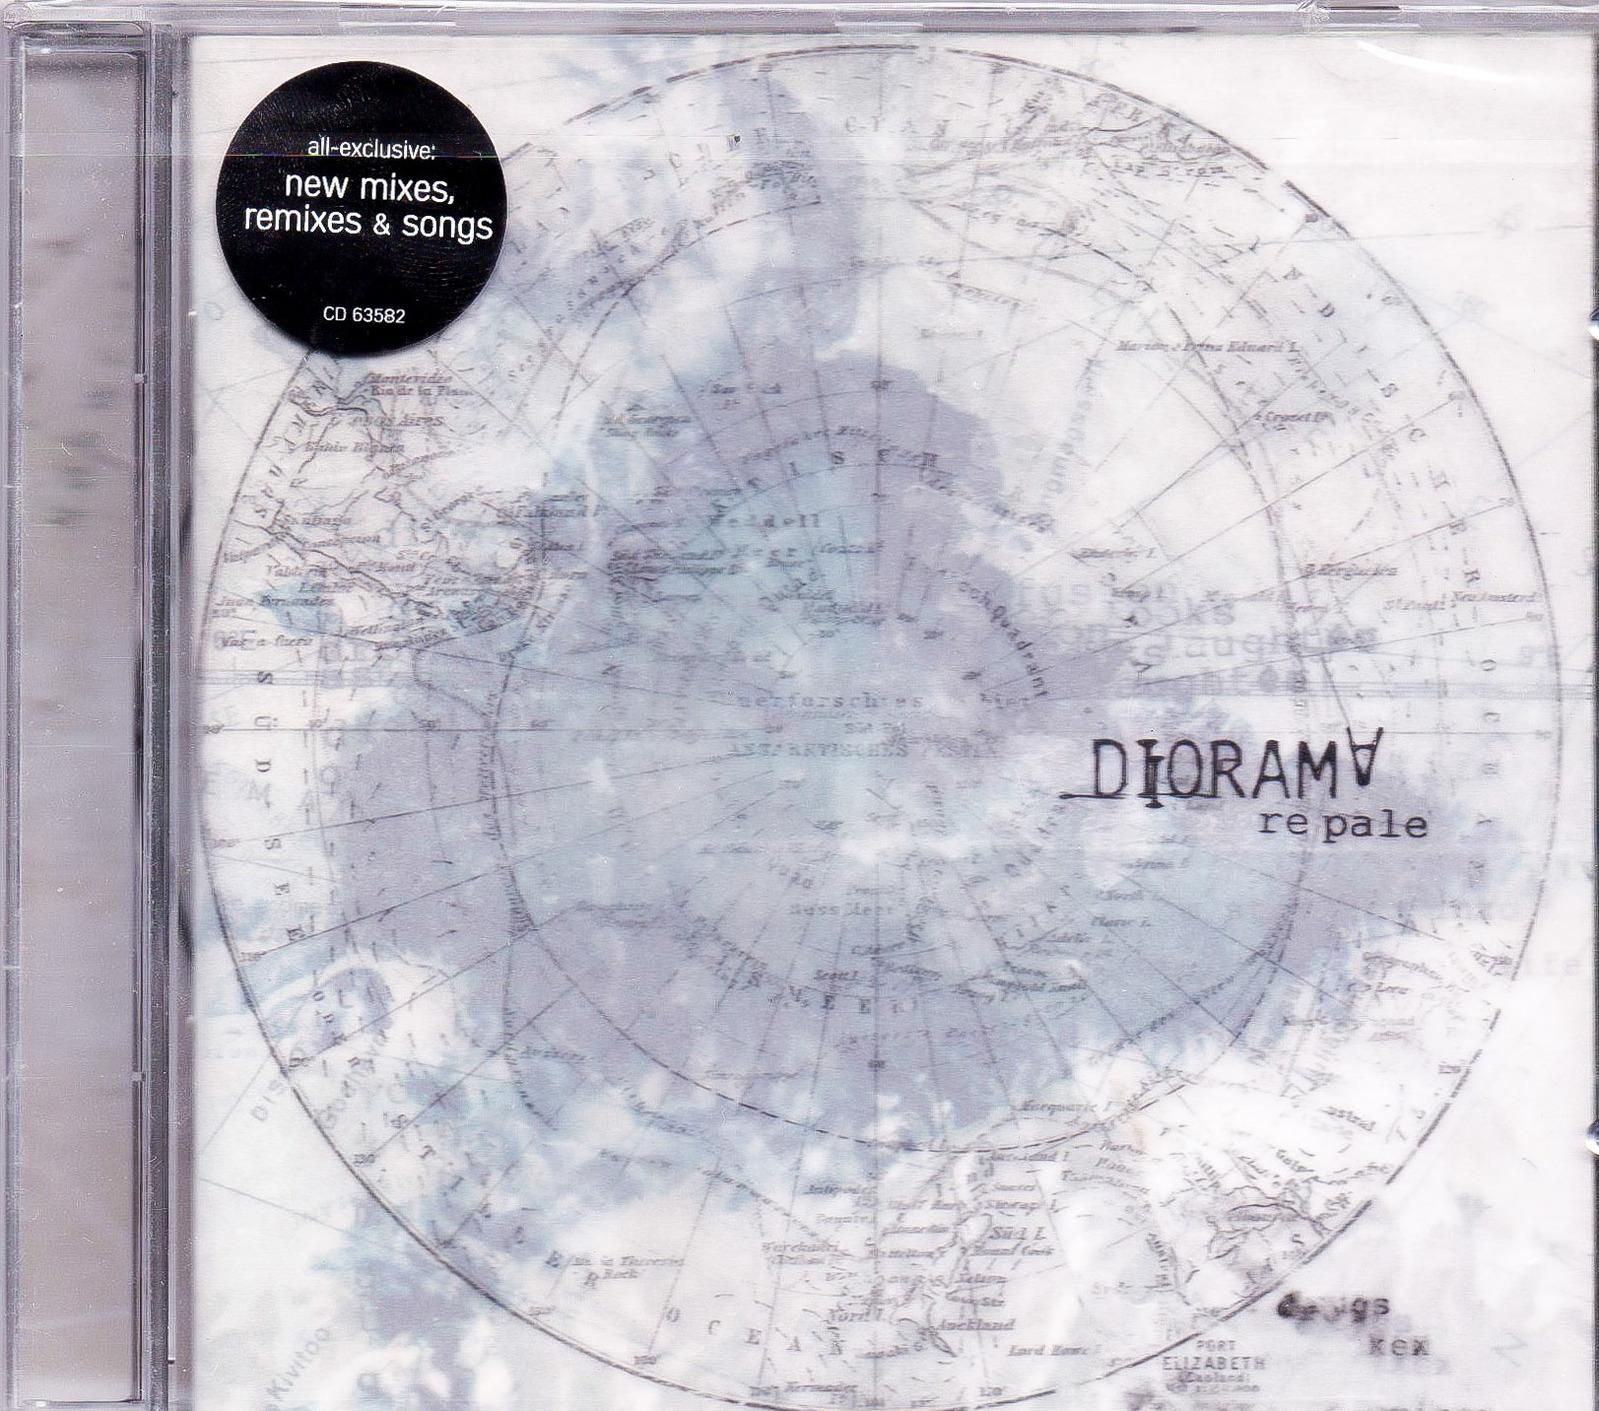 Re-Pale New Songs & -Diorama CD